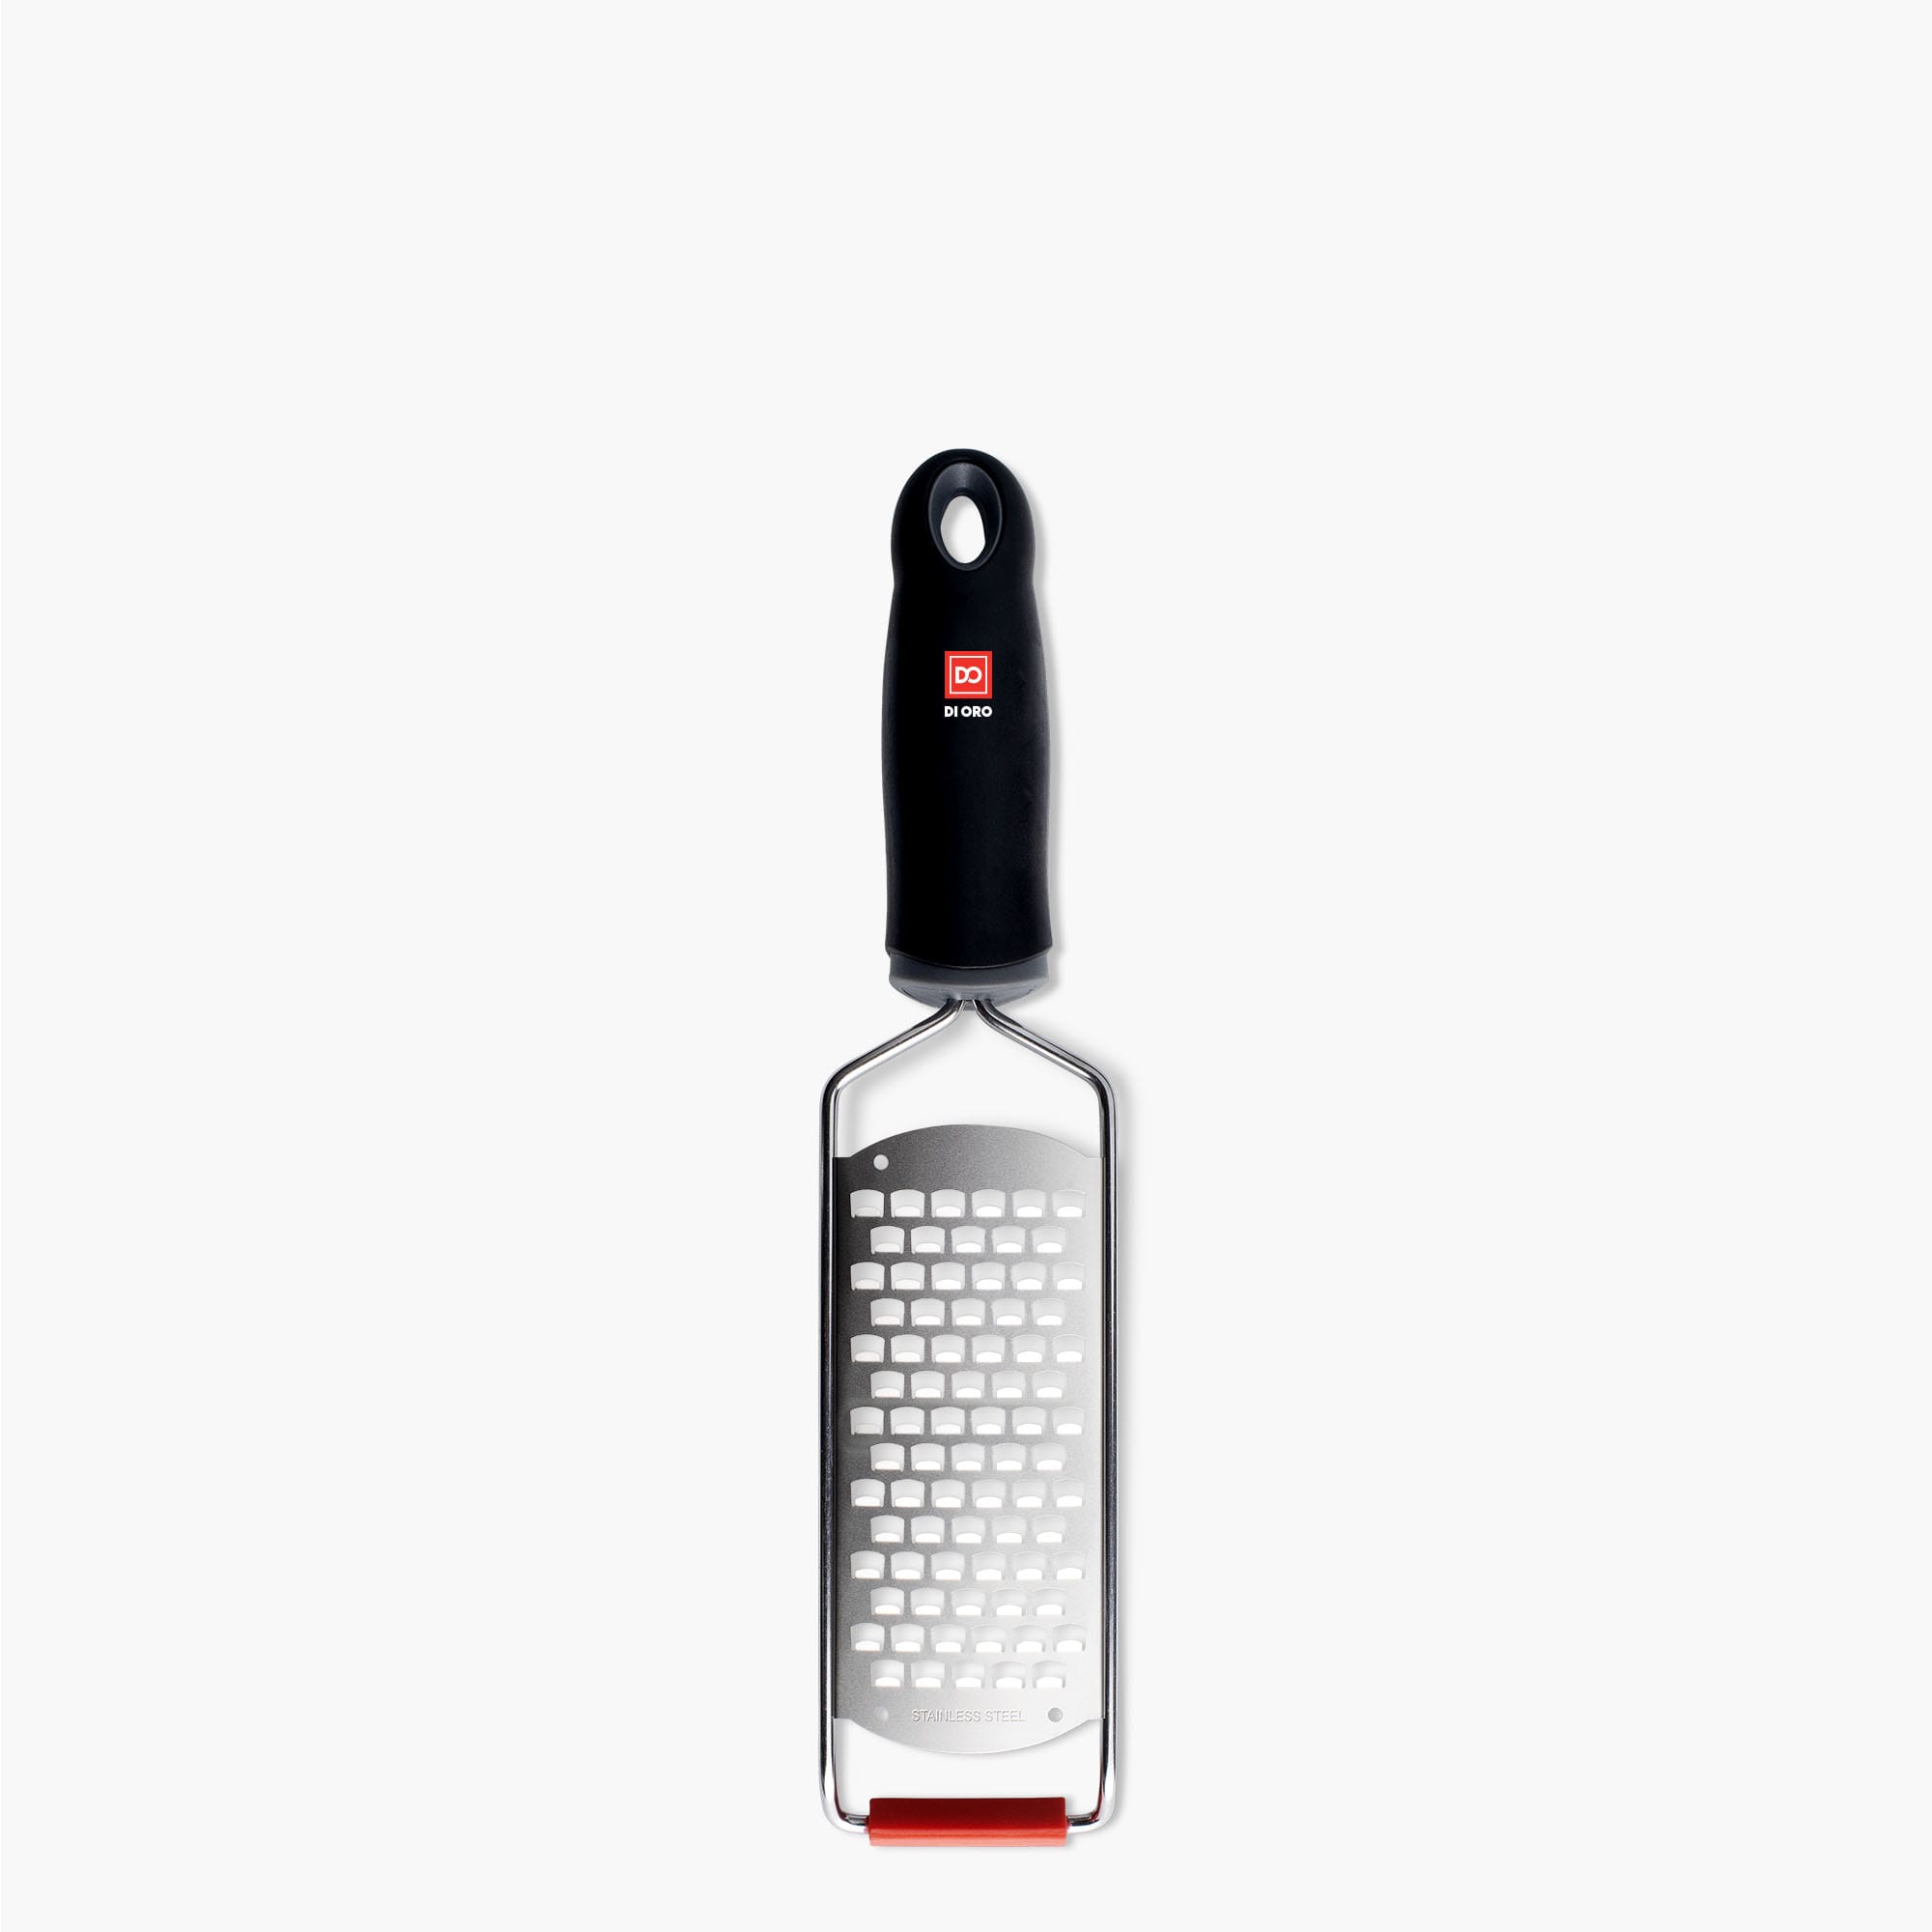 CUNSENR Professional Handheld Cheese Grater - Durable Cheese Grater with  Soft Handle - Graters for Kitchen, Spices, Ginger - Stainless Steel Cheese